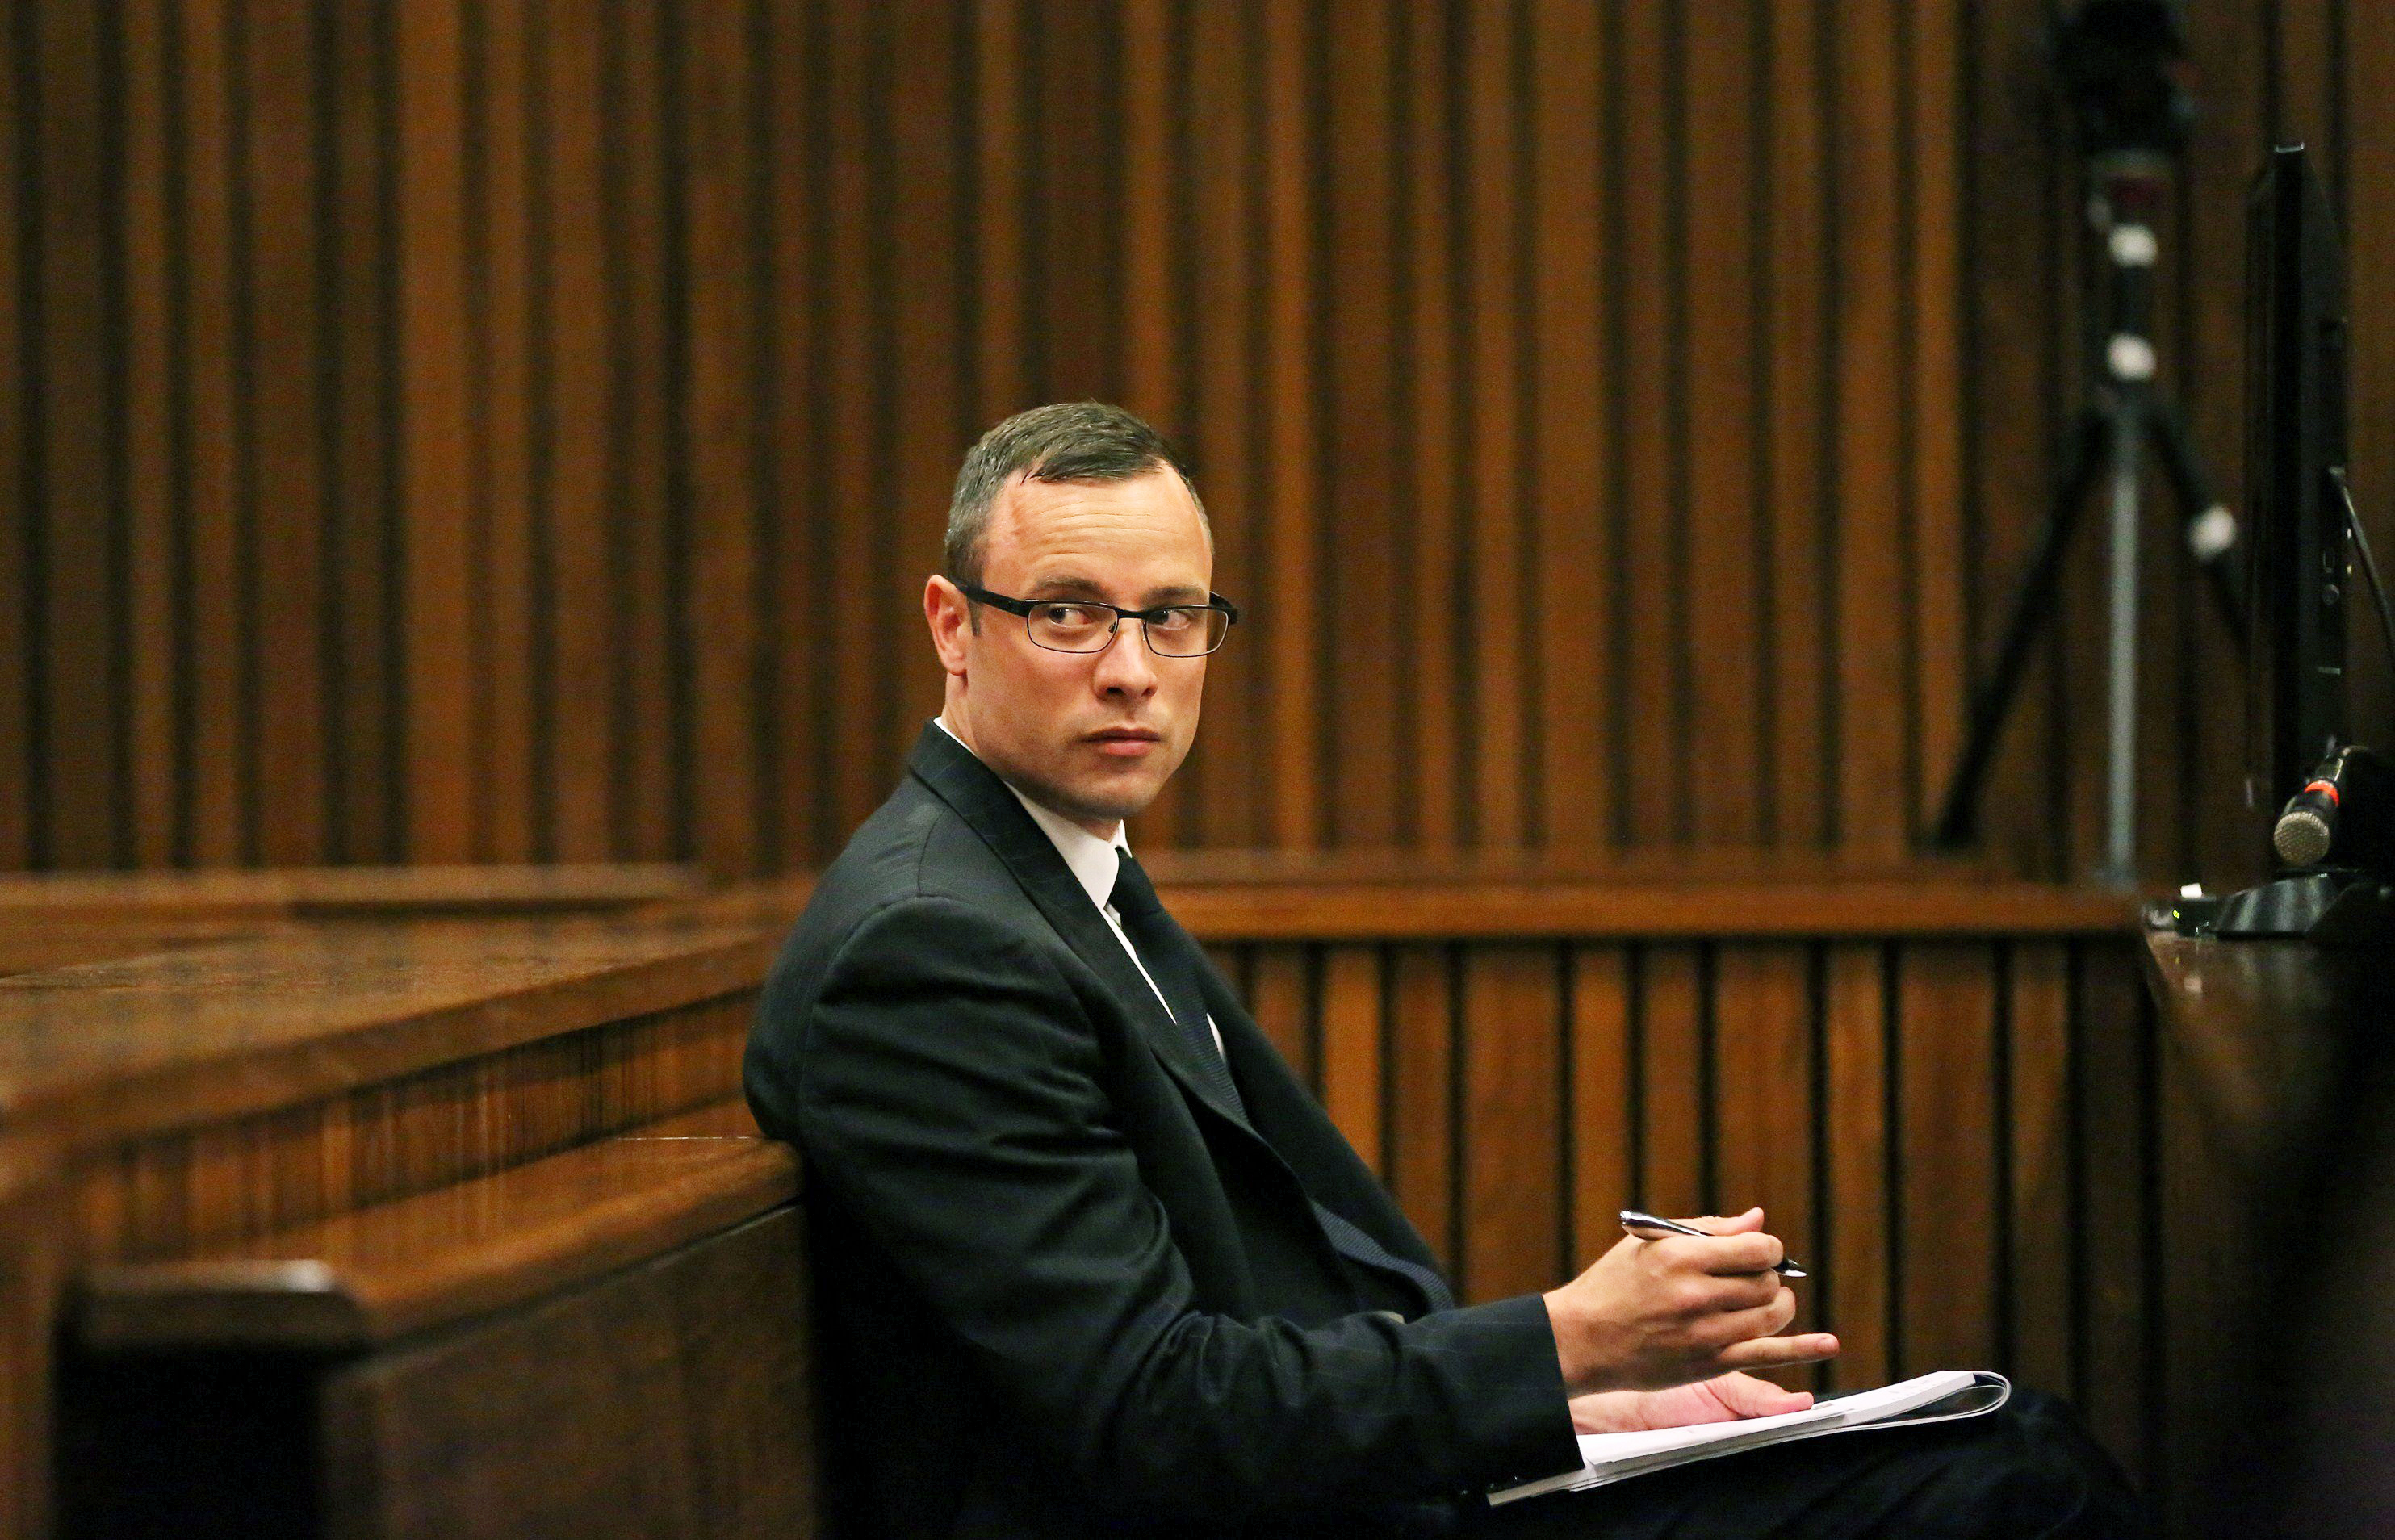 Paralympic track star Oscar Pistorius sits in the dock during his trial for the murder of his girlfriend Reeva Steenkamp, at the North Gauteng High Court in Pretoria, on March 25, 2014. (Siphiwe Sibeko—AFP/Getty Images)